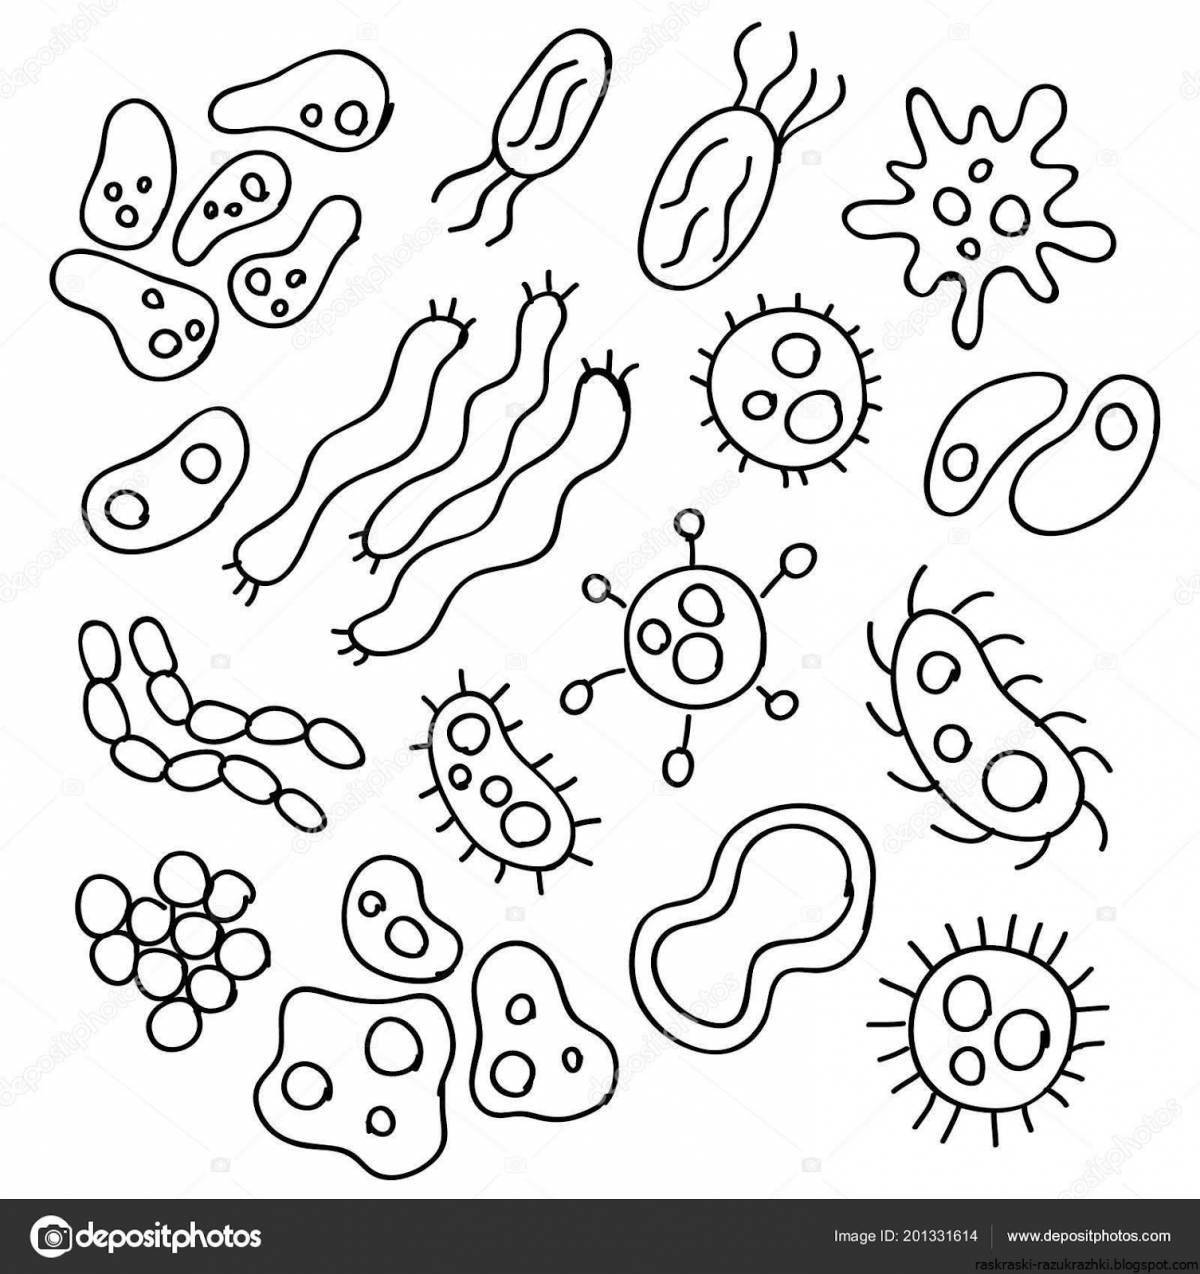 Colorful and detailed virus and microbe coloring pages